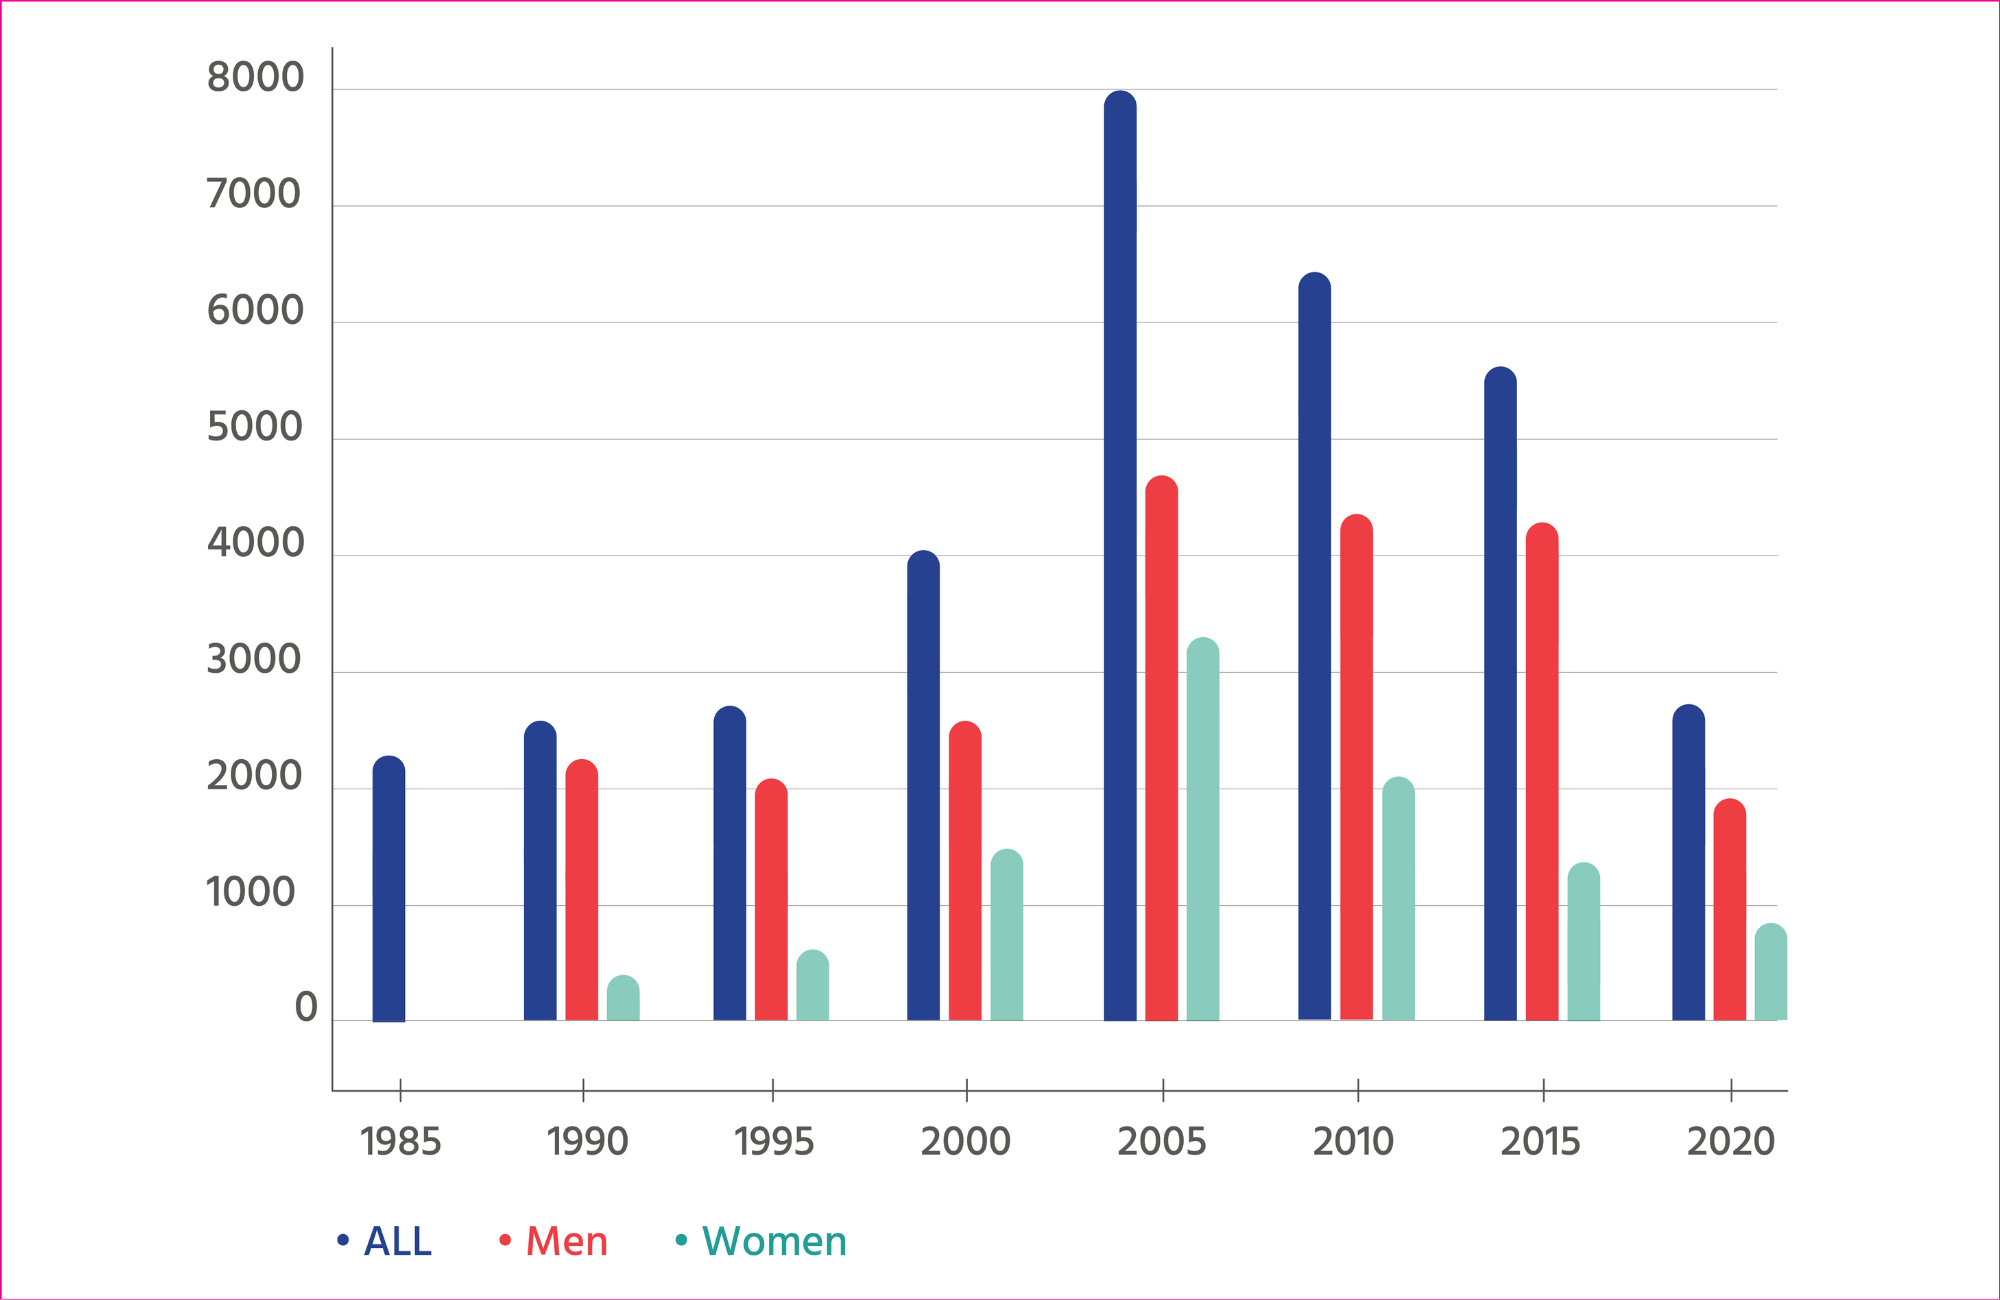 New HIV diagnoses in the UK by year, by gender